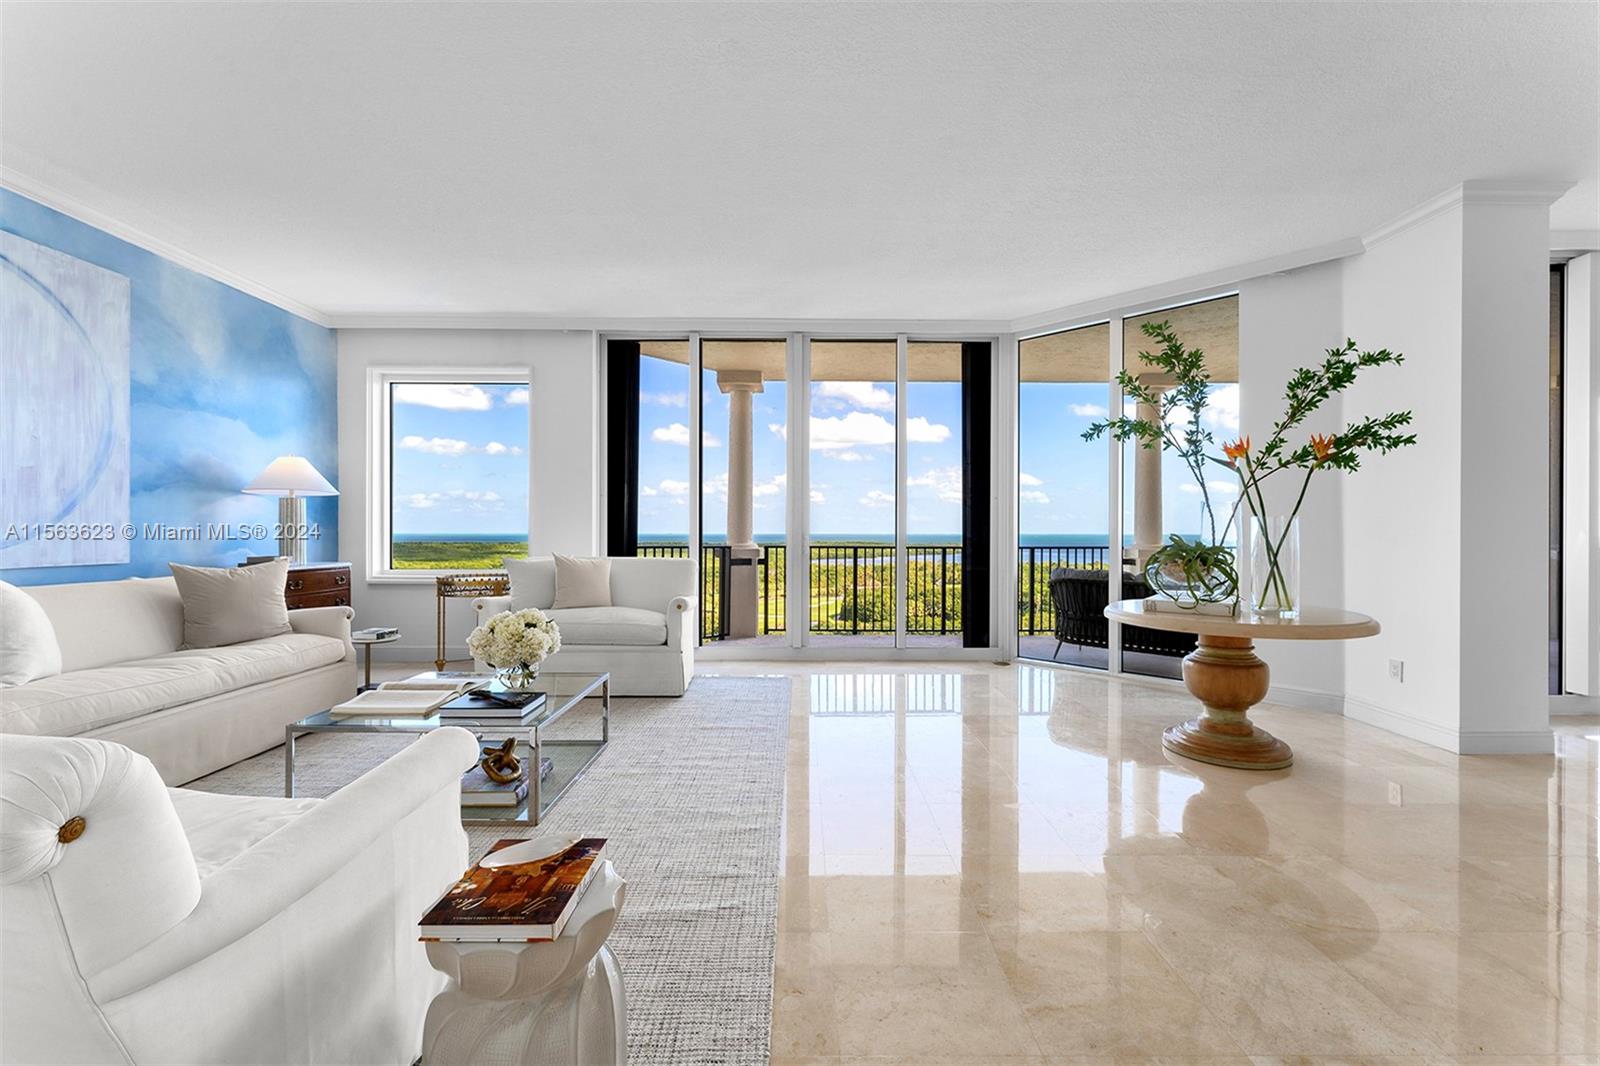 Property for Sale at 13627 Deering Bay Dr 1202, Coral Gables, Broward County, Florida - Bedrooms: 4 
Bathrooms: 5  - $4,500,000